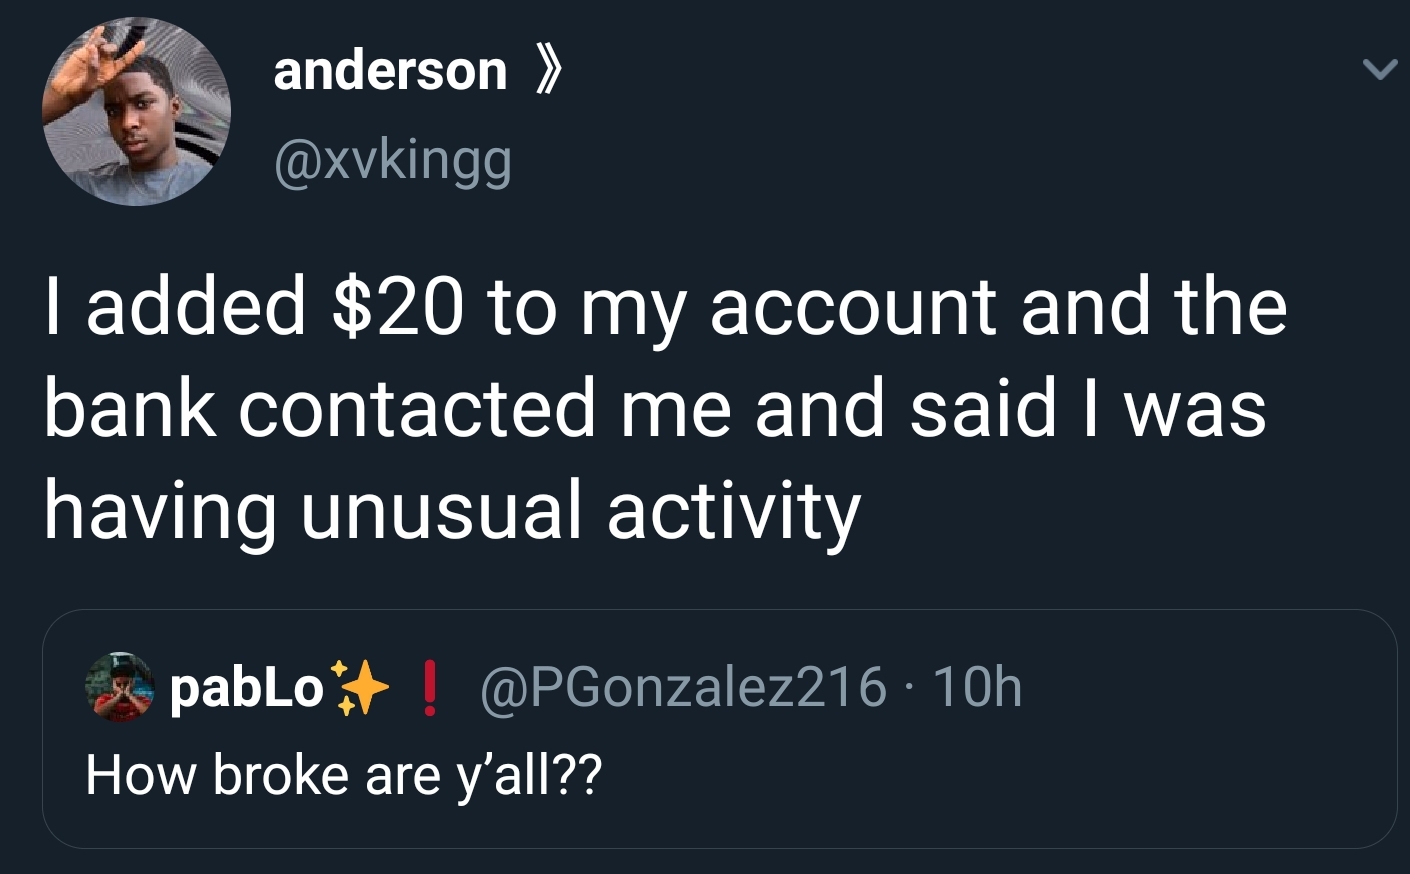 presentation - anderson > Tadded $20 to my account and the bank contacted me and said I was having unusual activity pablo ! 10h How broke are y'all??